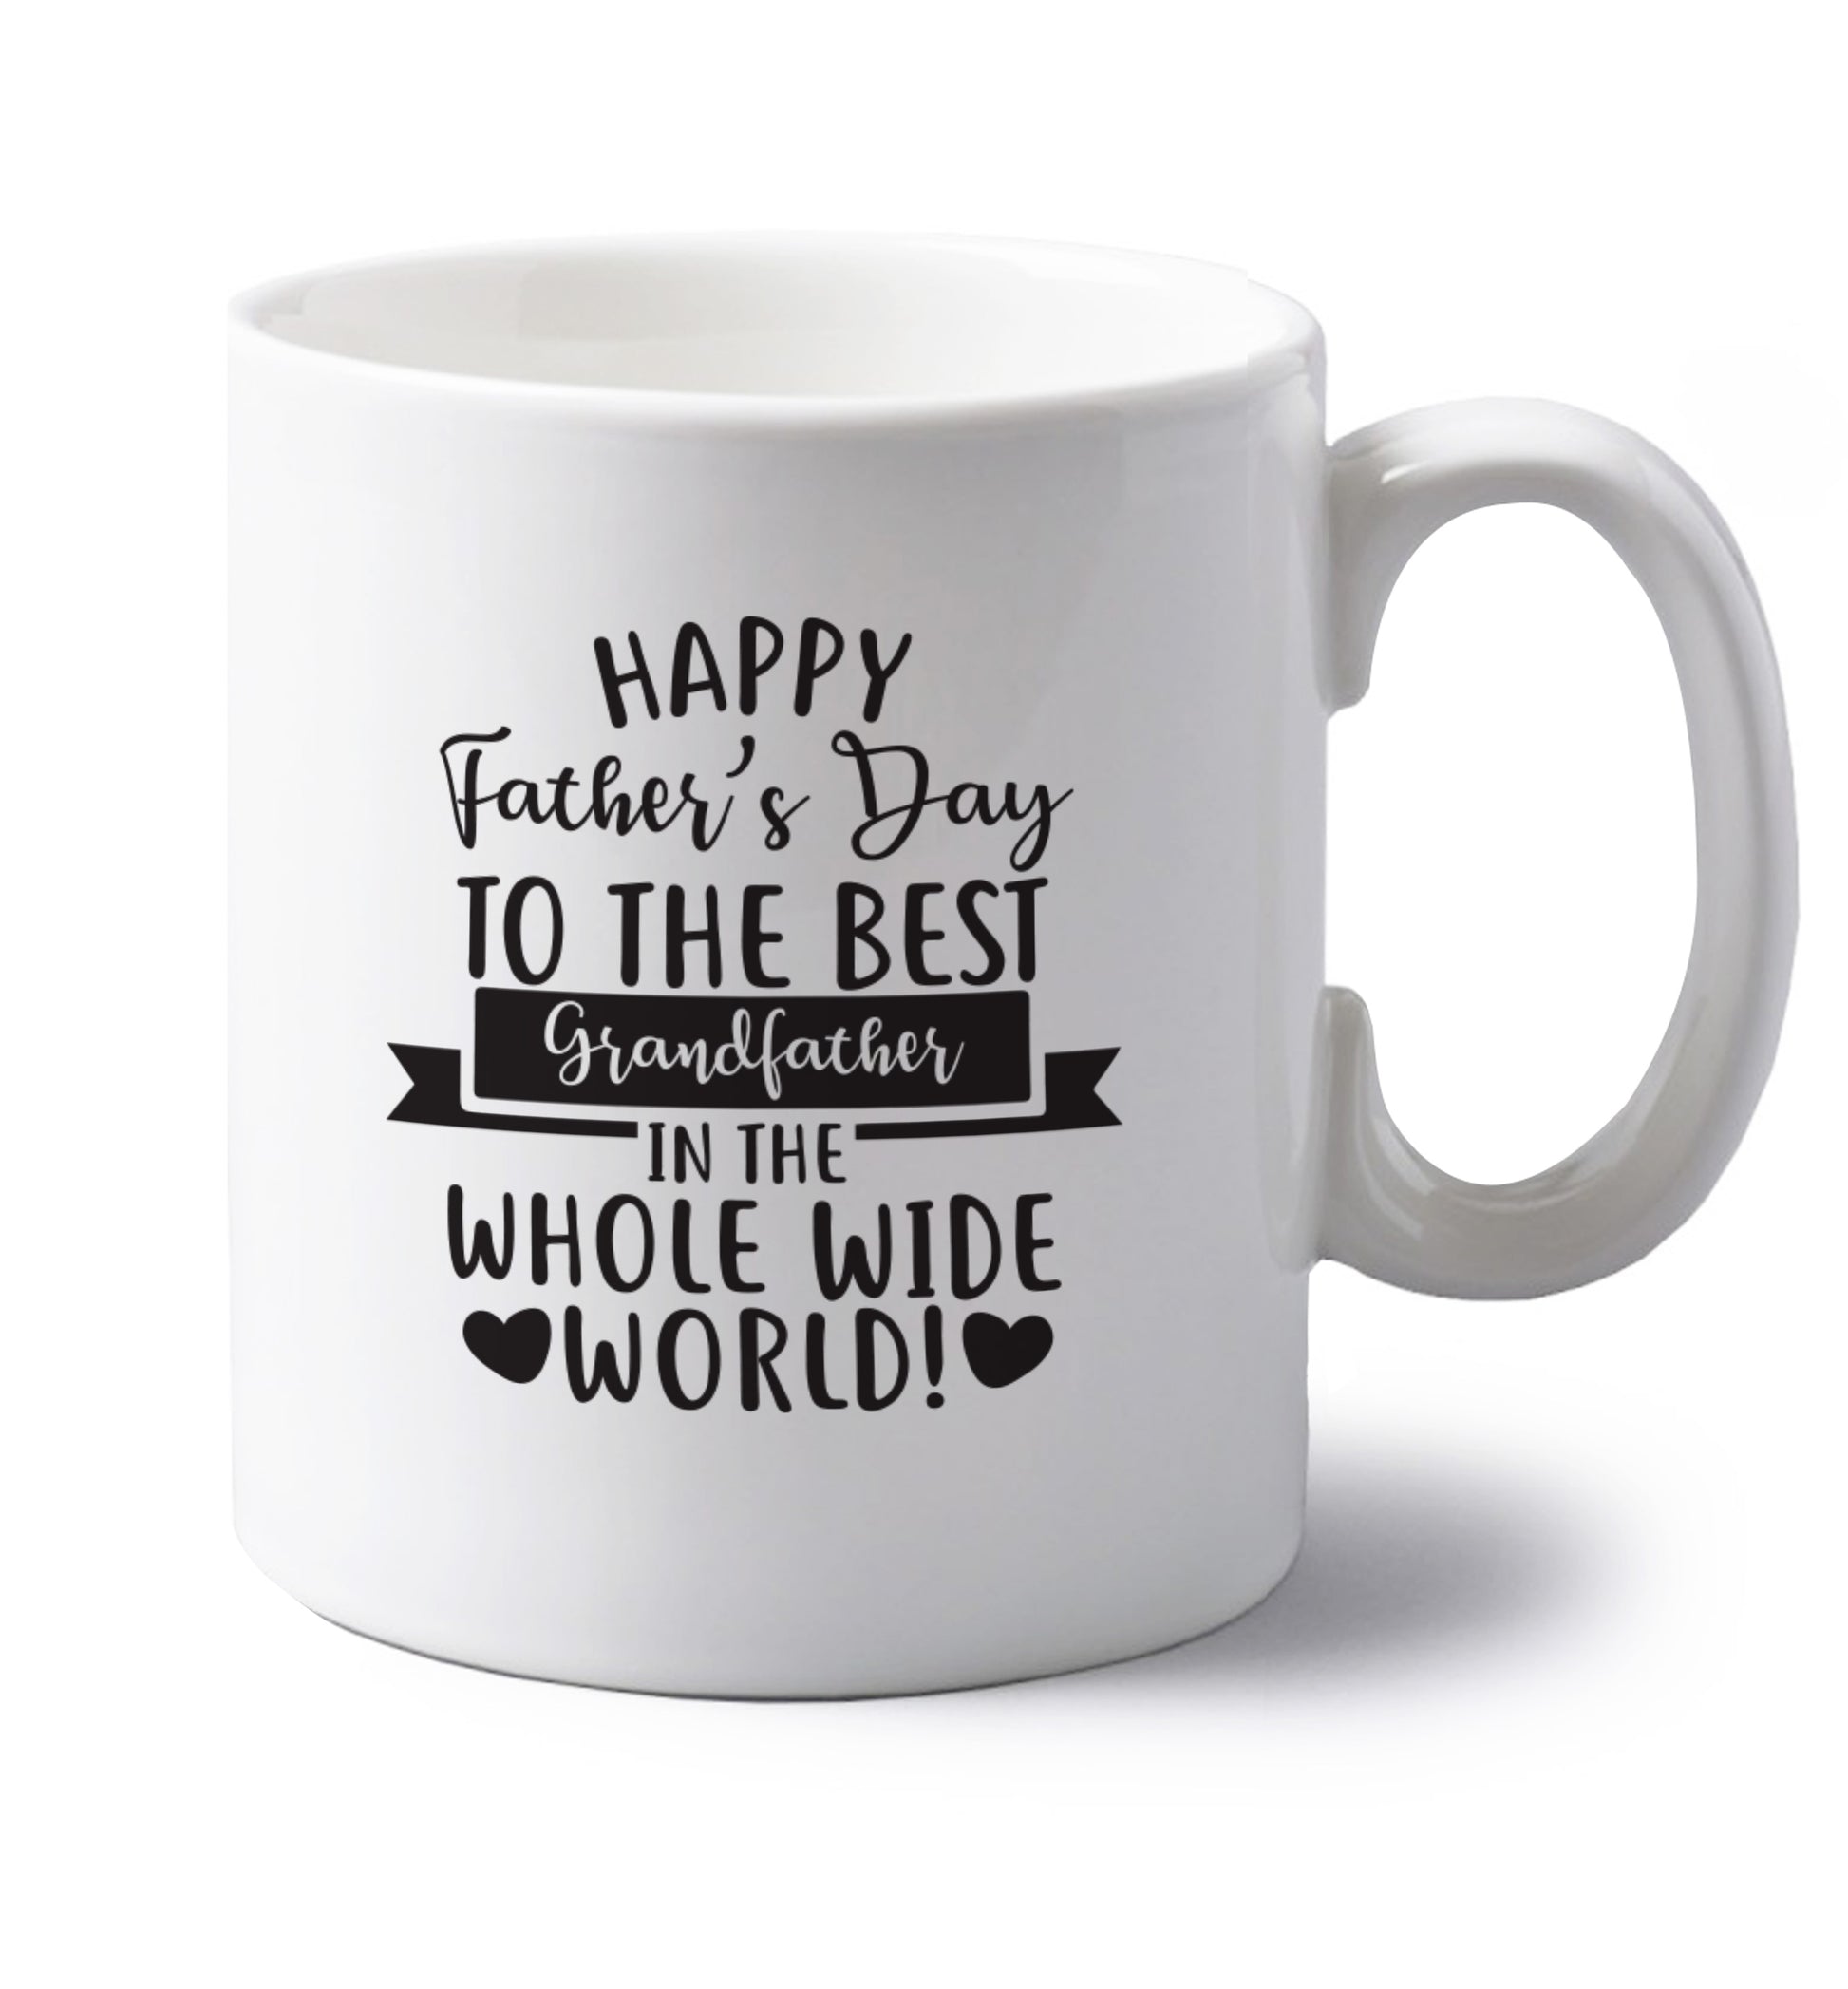 Happy Father's Day to the best grandfather in the world left handed white ceramic mug 